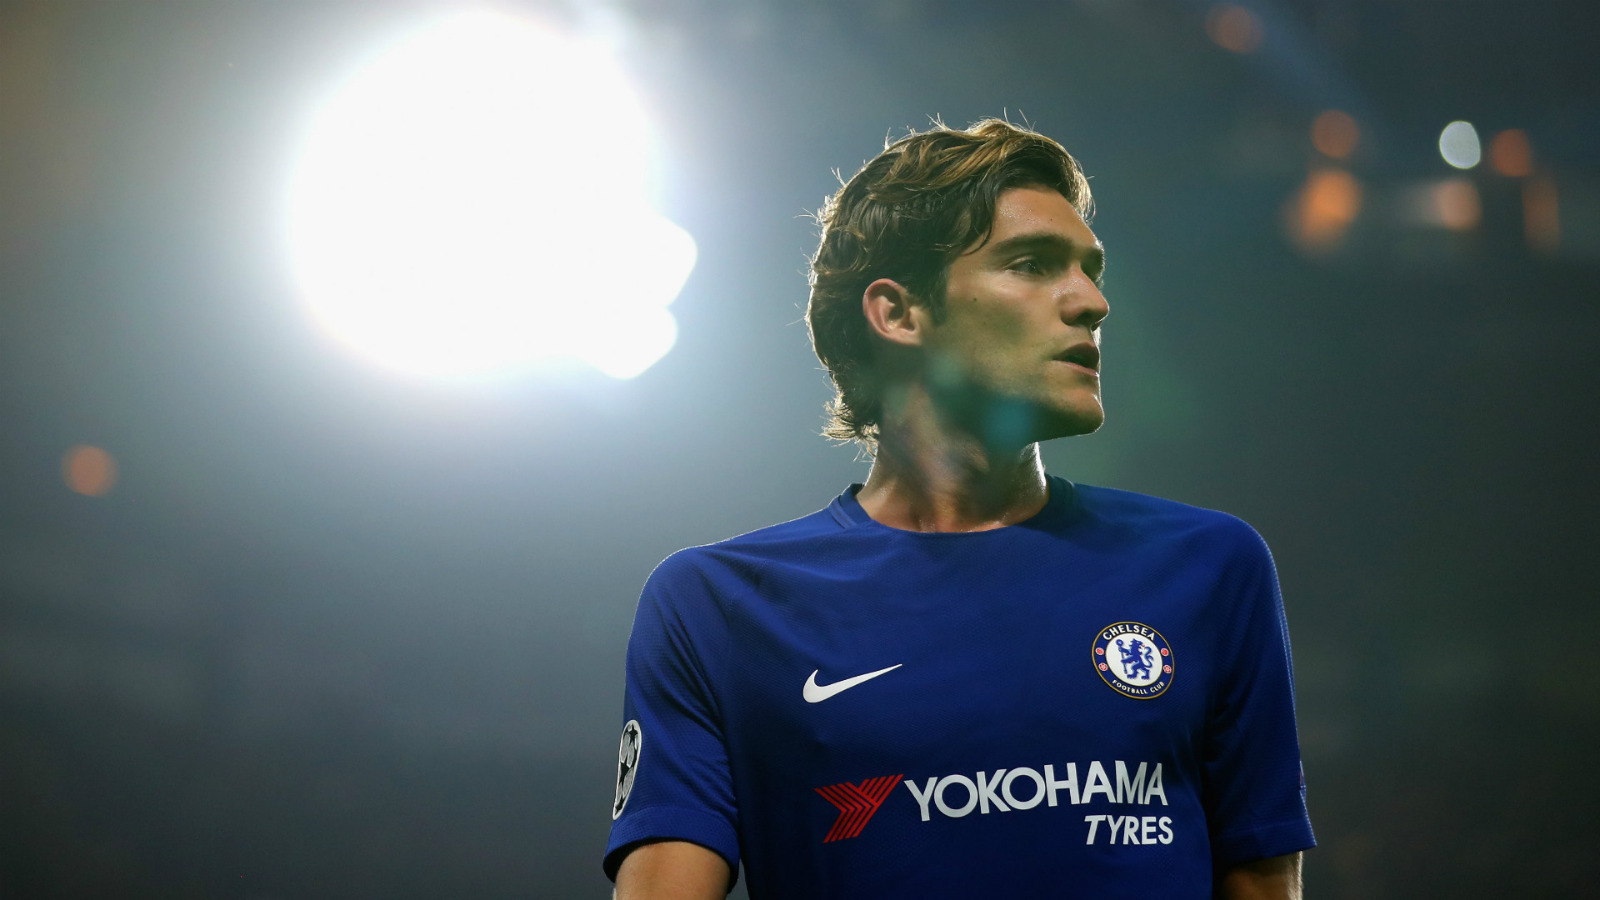 Italian giants Juventus and Inter Milan are hunting for Chelsea defender Marcos Alonso